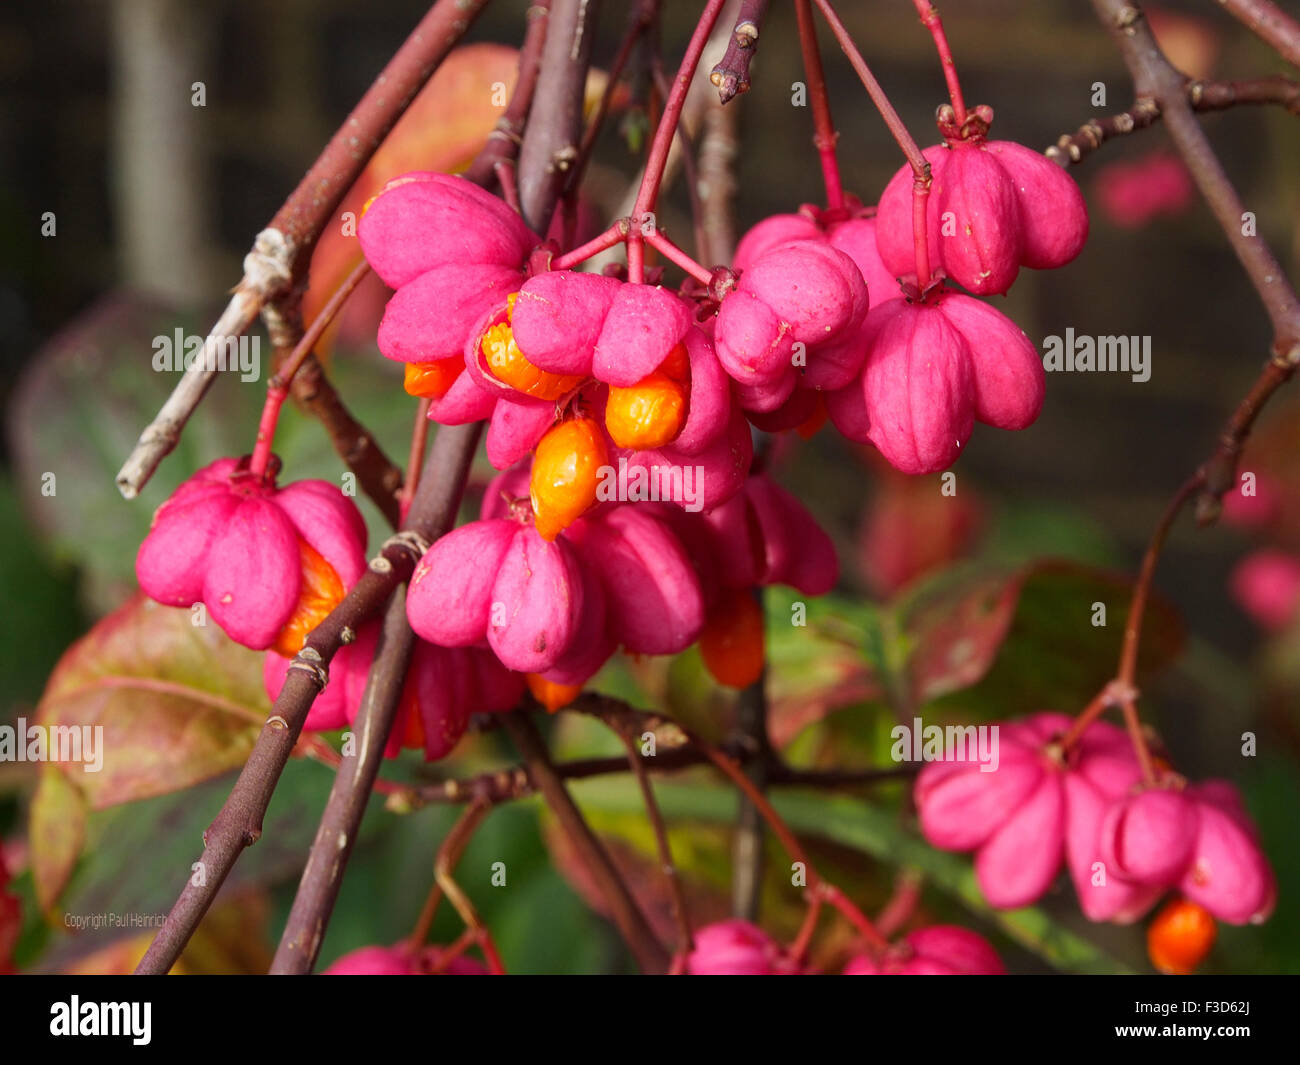 Euonymus europaeus (spindle, European spindle, common spindle) autumn leaves and bursting seed pods. Stock Photo